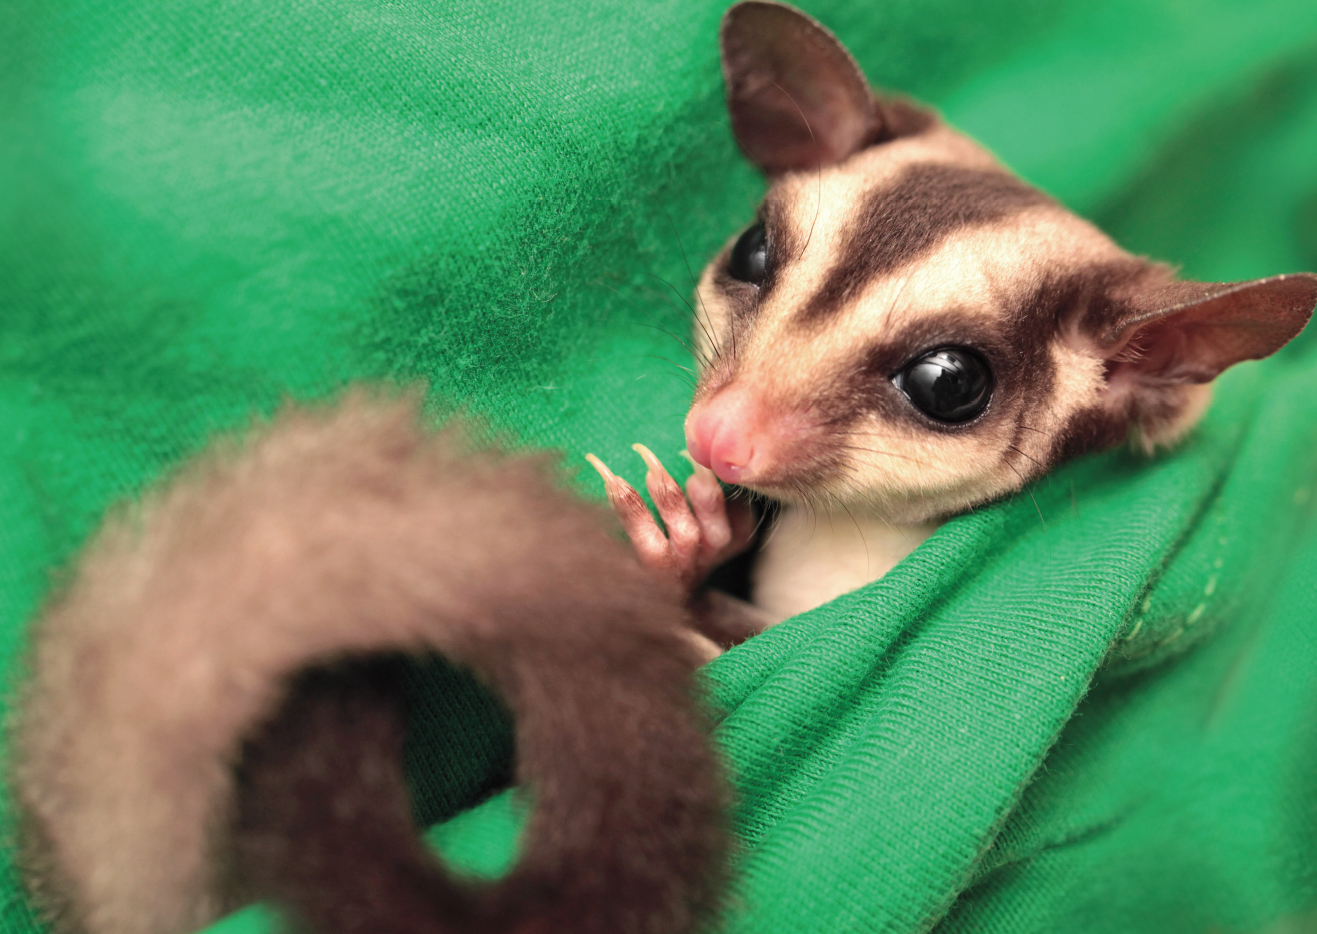 Some owners walk around their homes with their sugar gliders in their pockets - photo 7